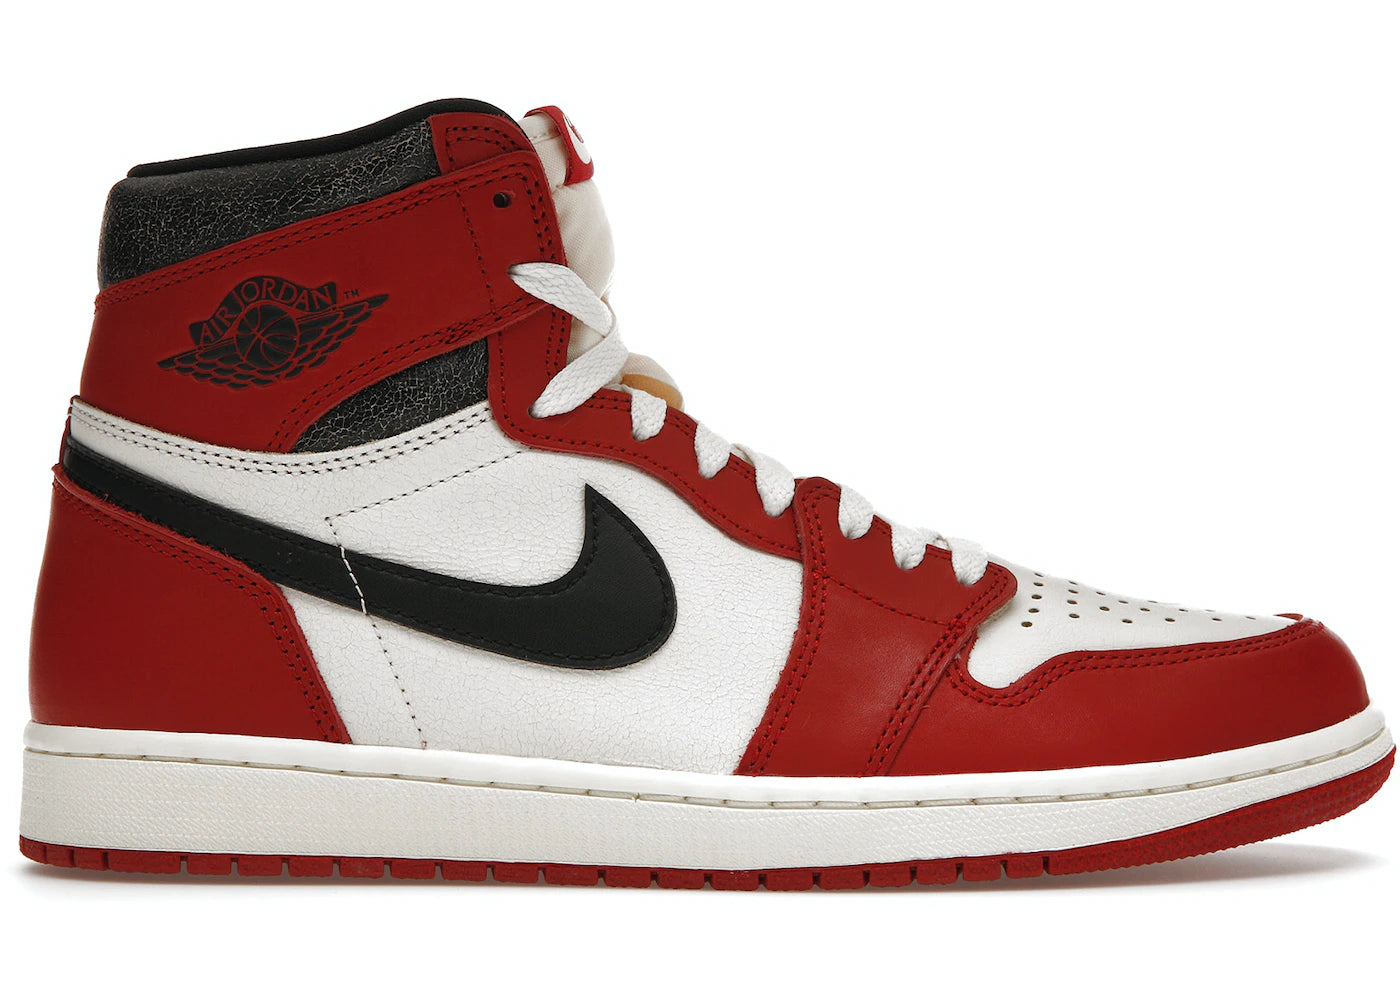 Air Jordan 1 Retro High OG Chicago Lost and Found (GS)